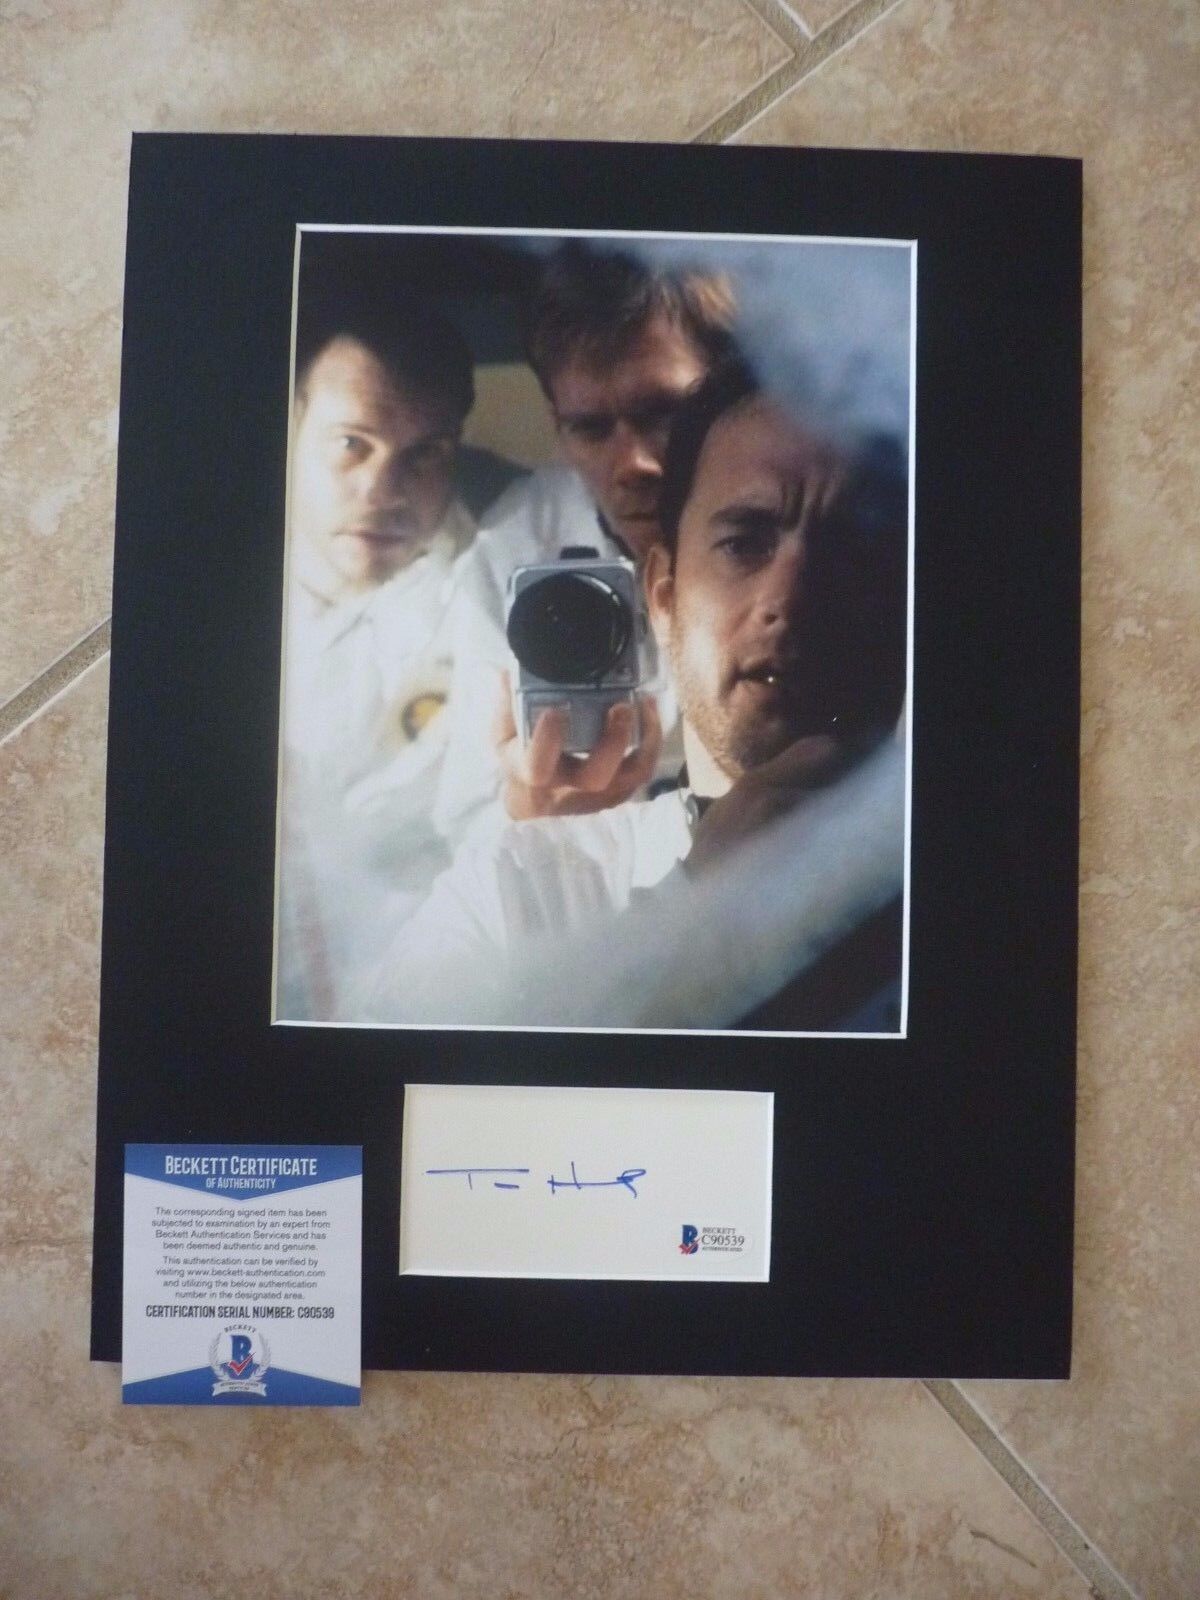 Tom Hanks Signed Autographed11 x14 Matted Photo Poster painting Display Apollo 13 BAS Certified